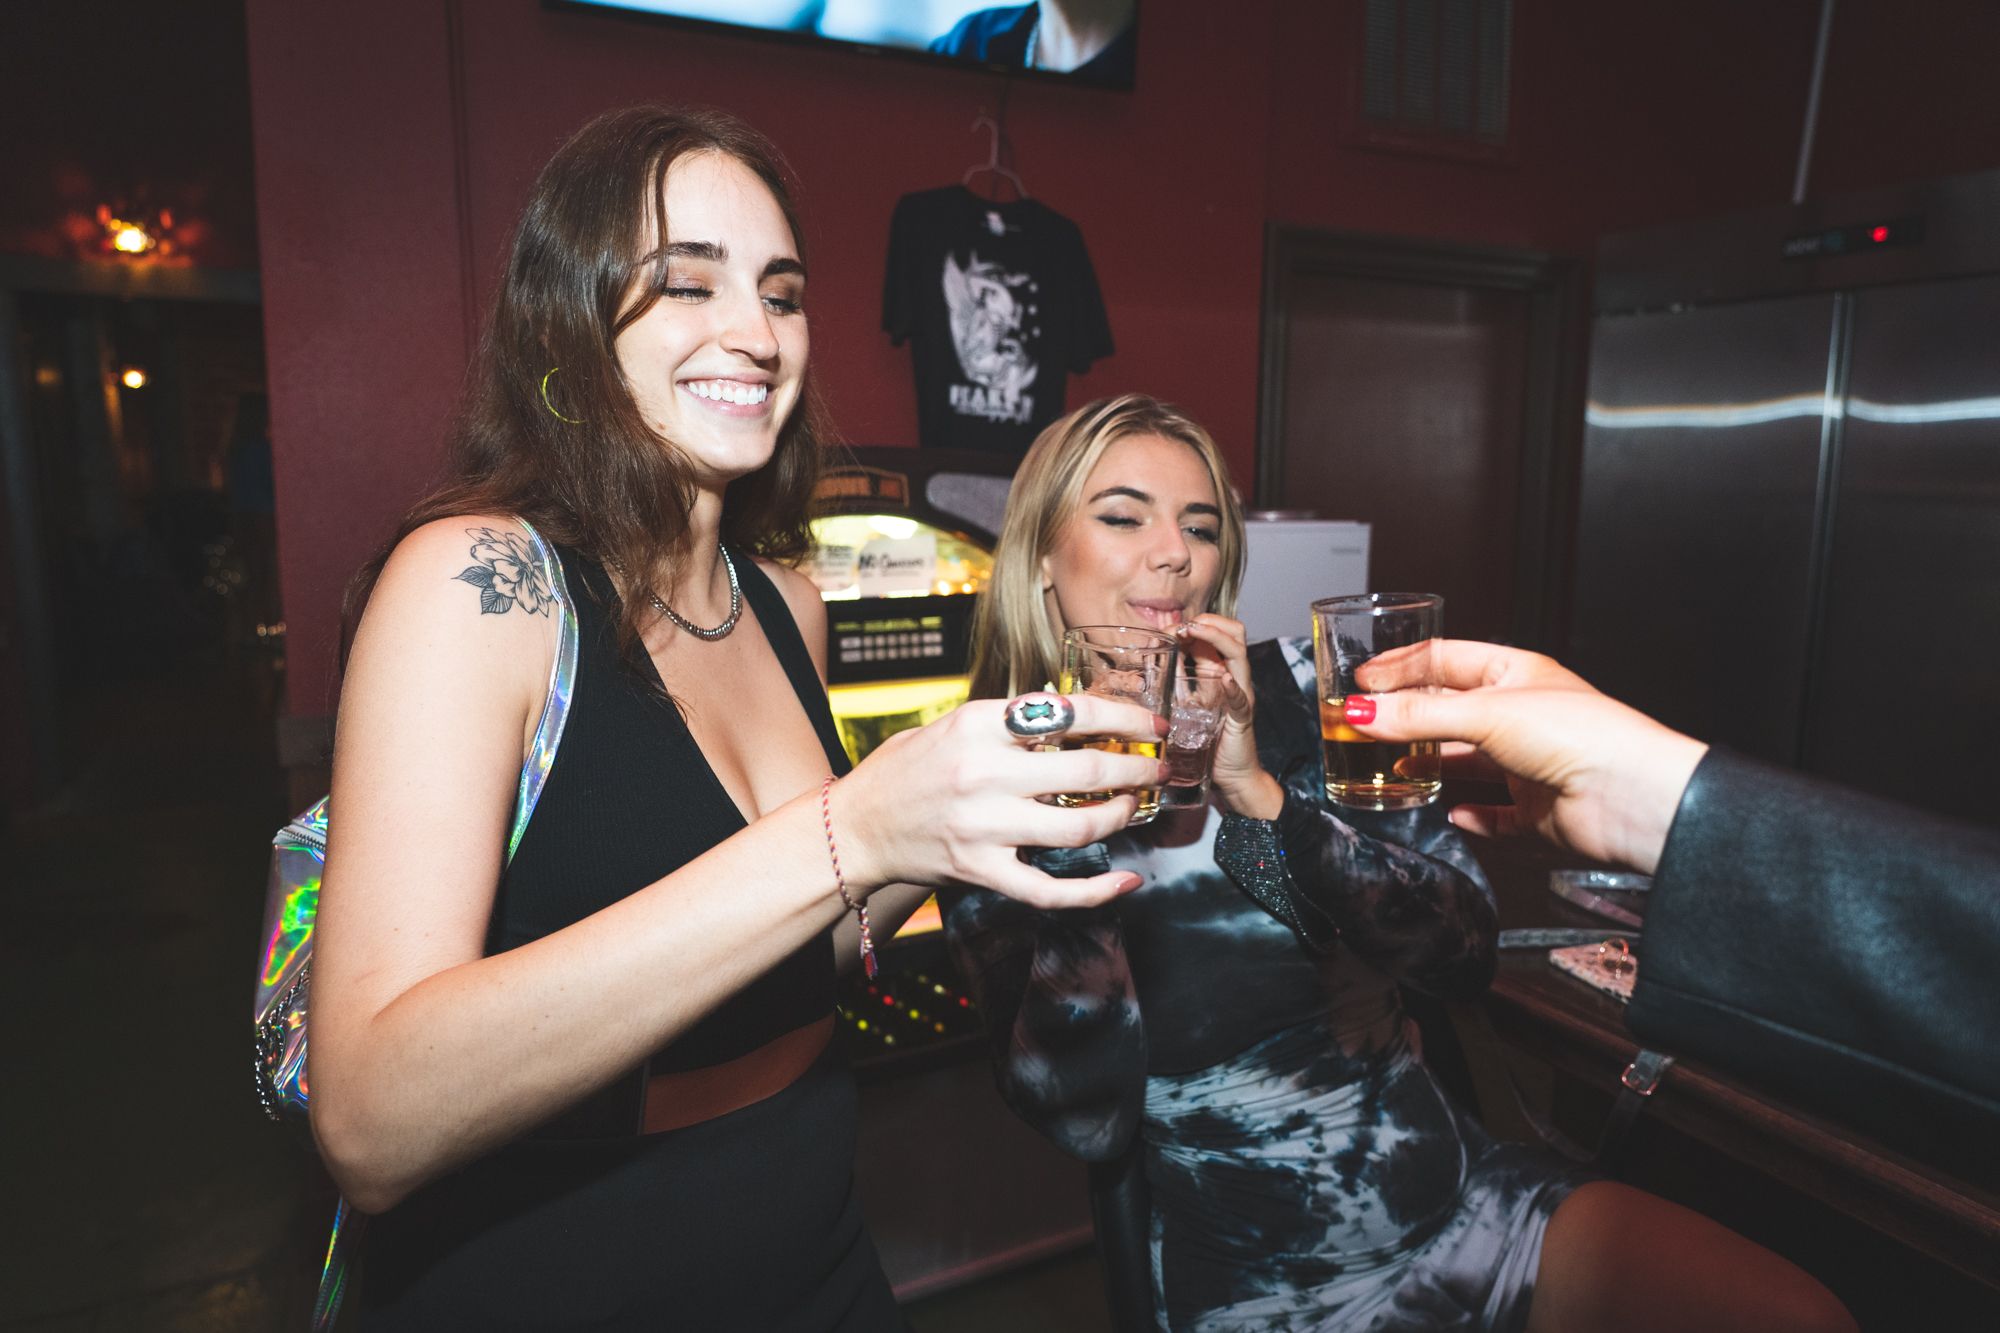 Two women drink shots as a man’s hand holds up a glass to cheers.